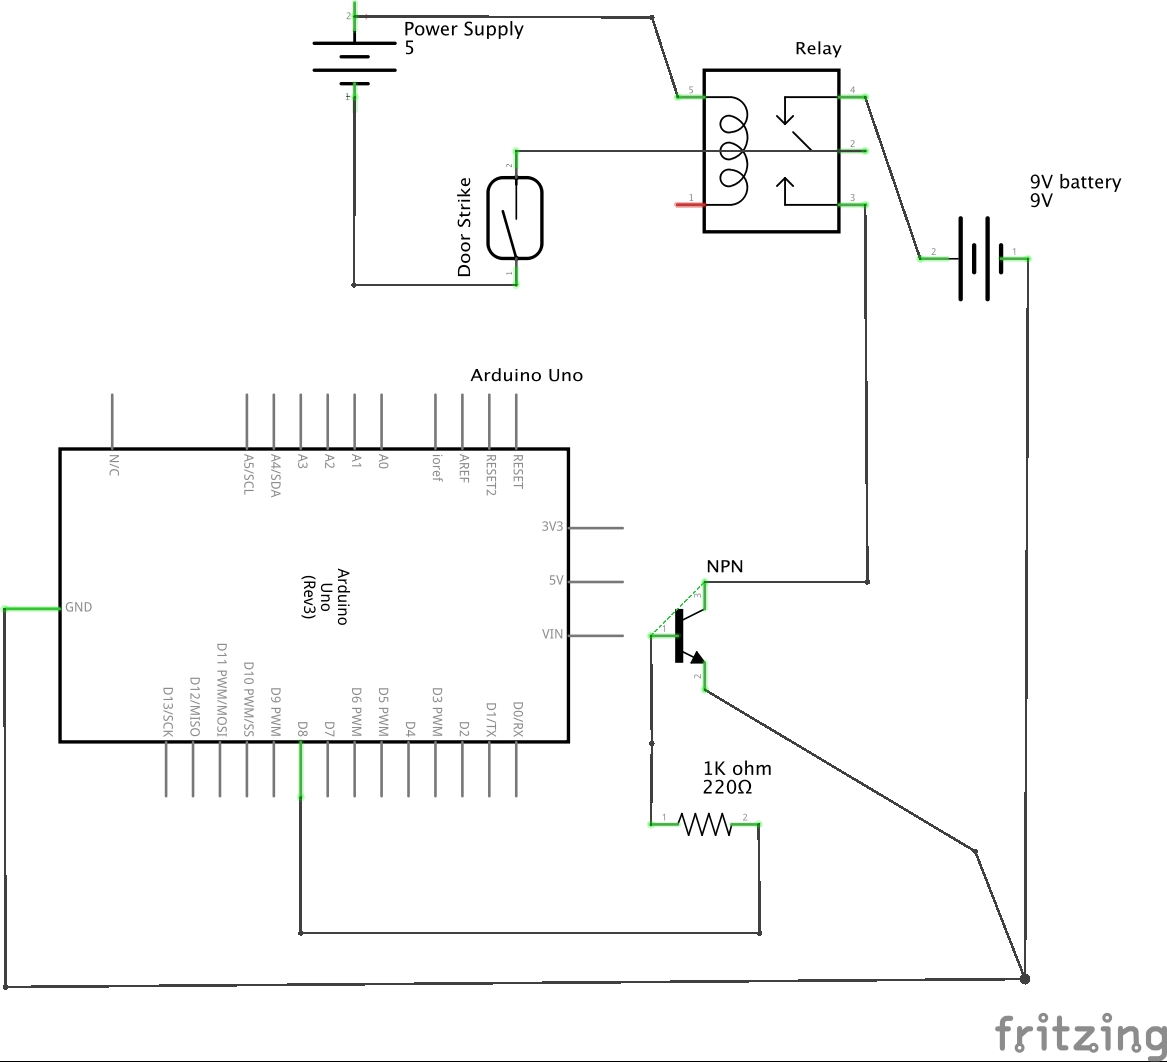 problem with connecting the Arduino with 12V electric door strike